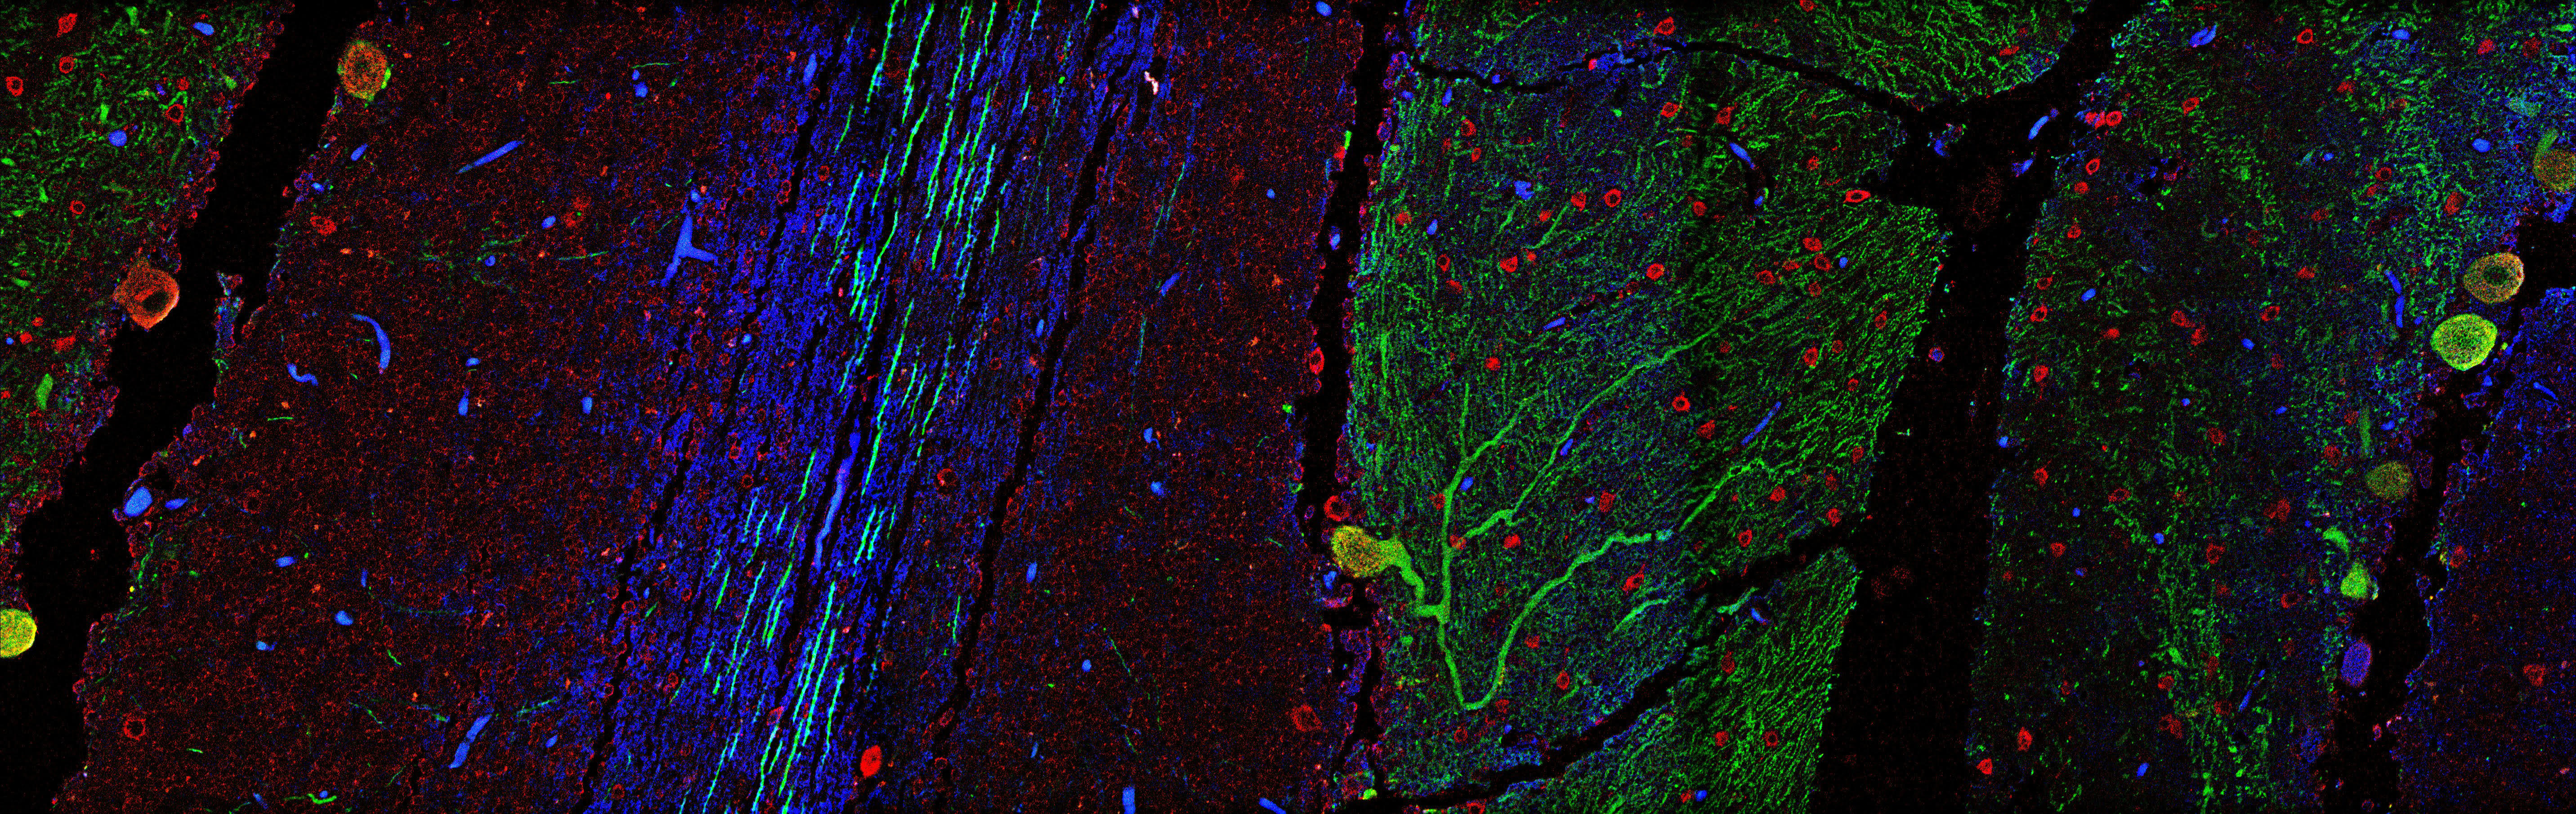 Immunohistochemistry imaging of a human cerebellum, with antibodies specific for Calbindin (green) and poly-ADP-ribosylation (PAR, red), as well as DNA (blue, stained with DAPI)